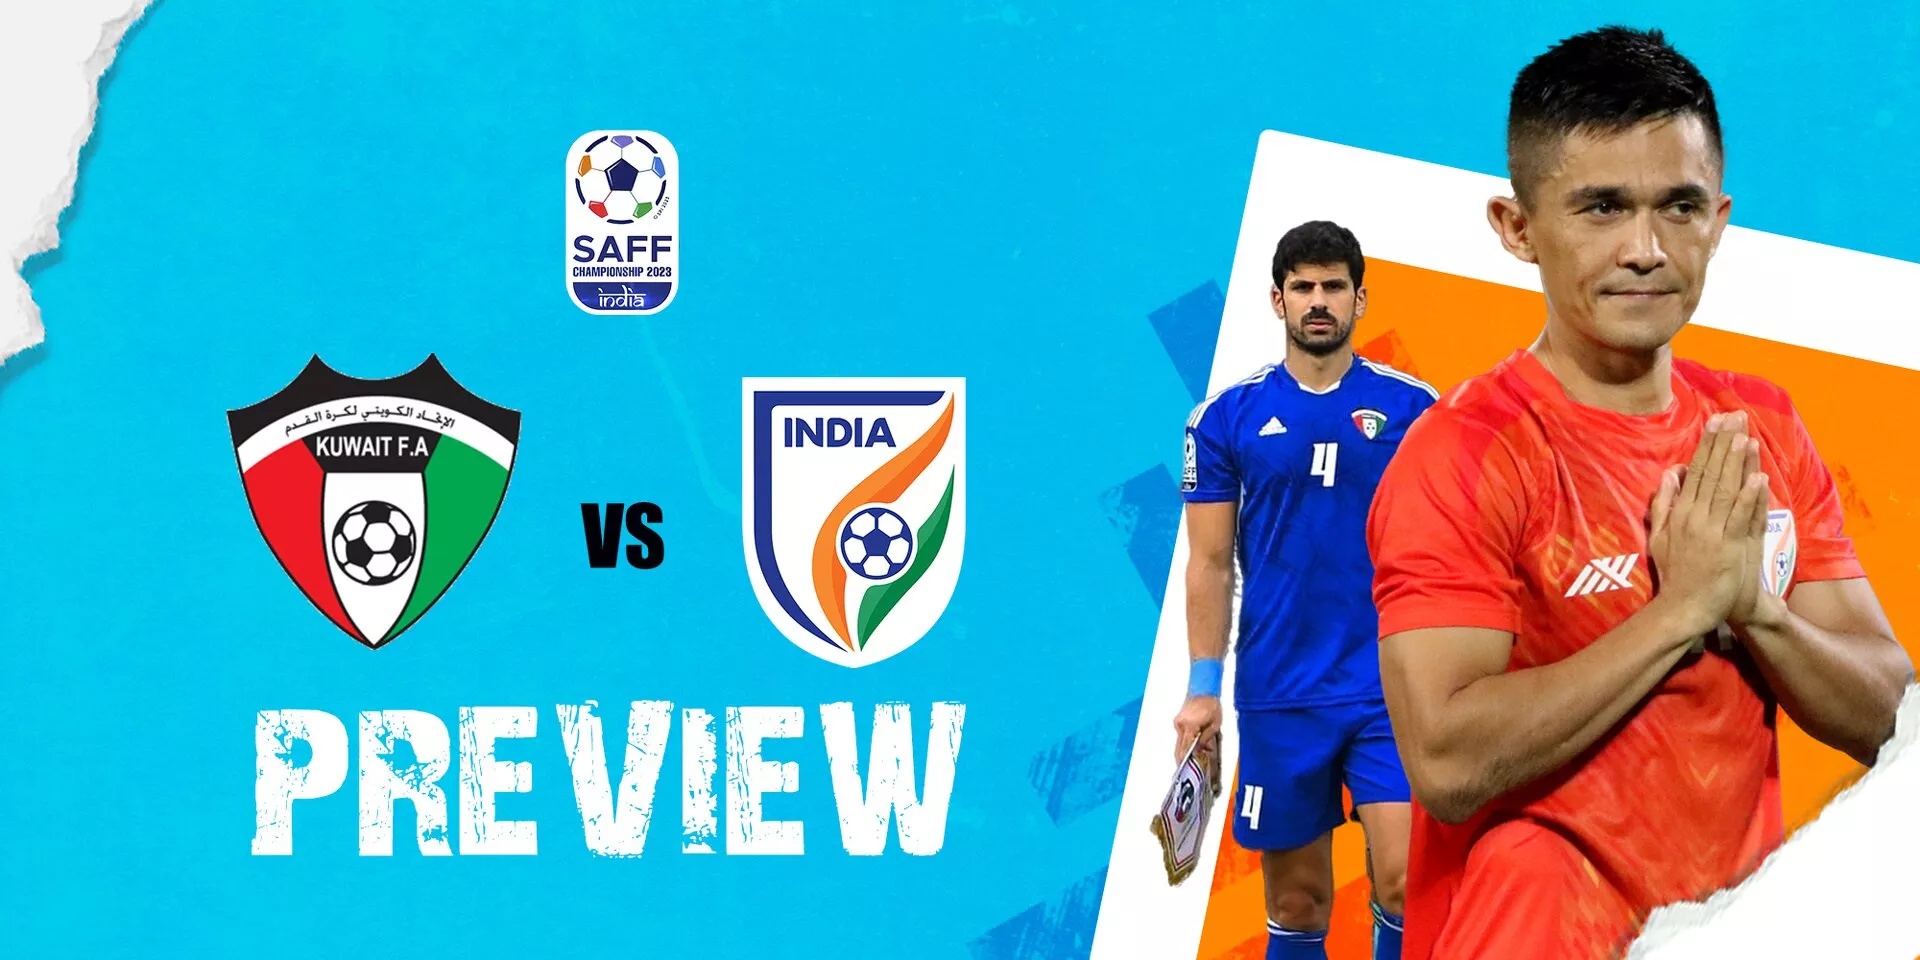 SAFF Championship 2023 Final: India meet Kuwait in aim to defend title